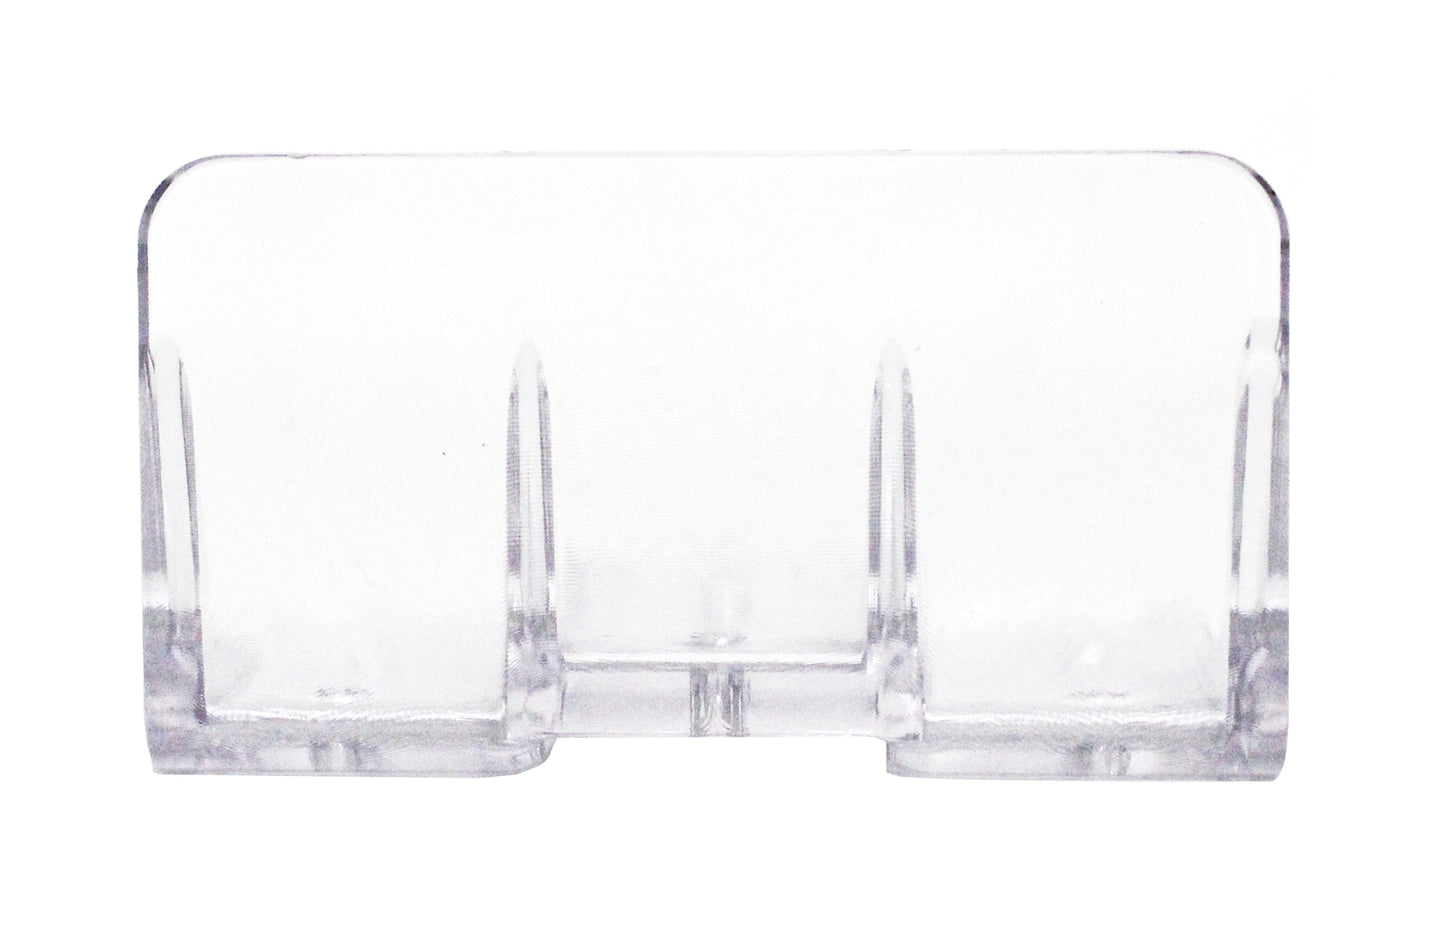 Clear Plastic Jumbo Rocky Snow & Ice Roof Guards with Minor Rib Straddling Step Prevents Sliding Snow Ice Buildup